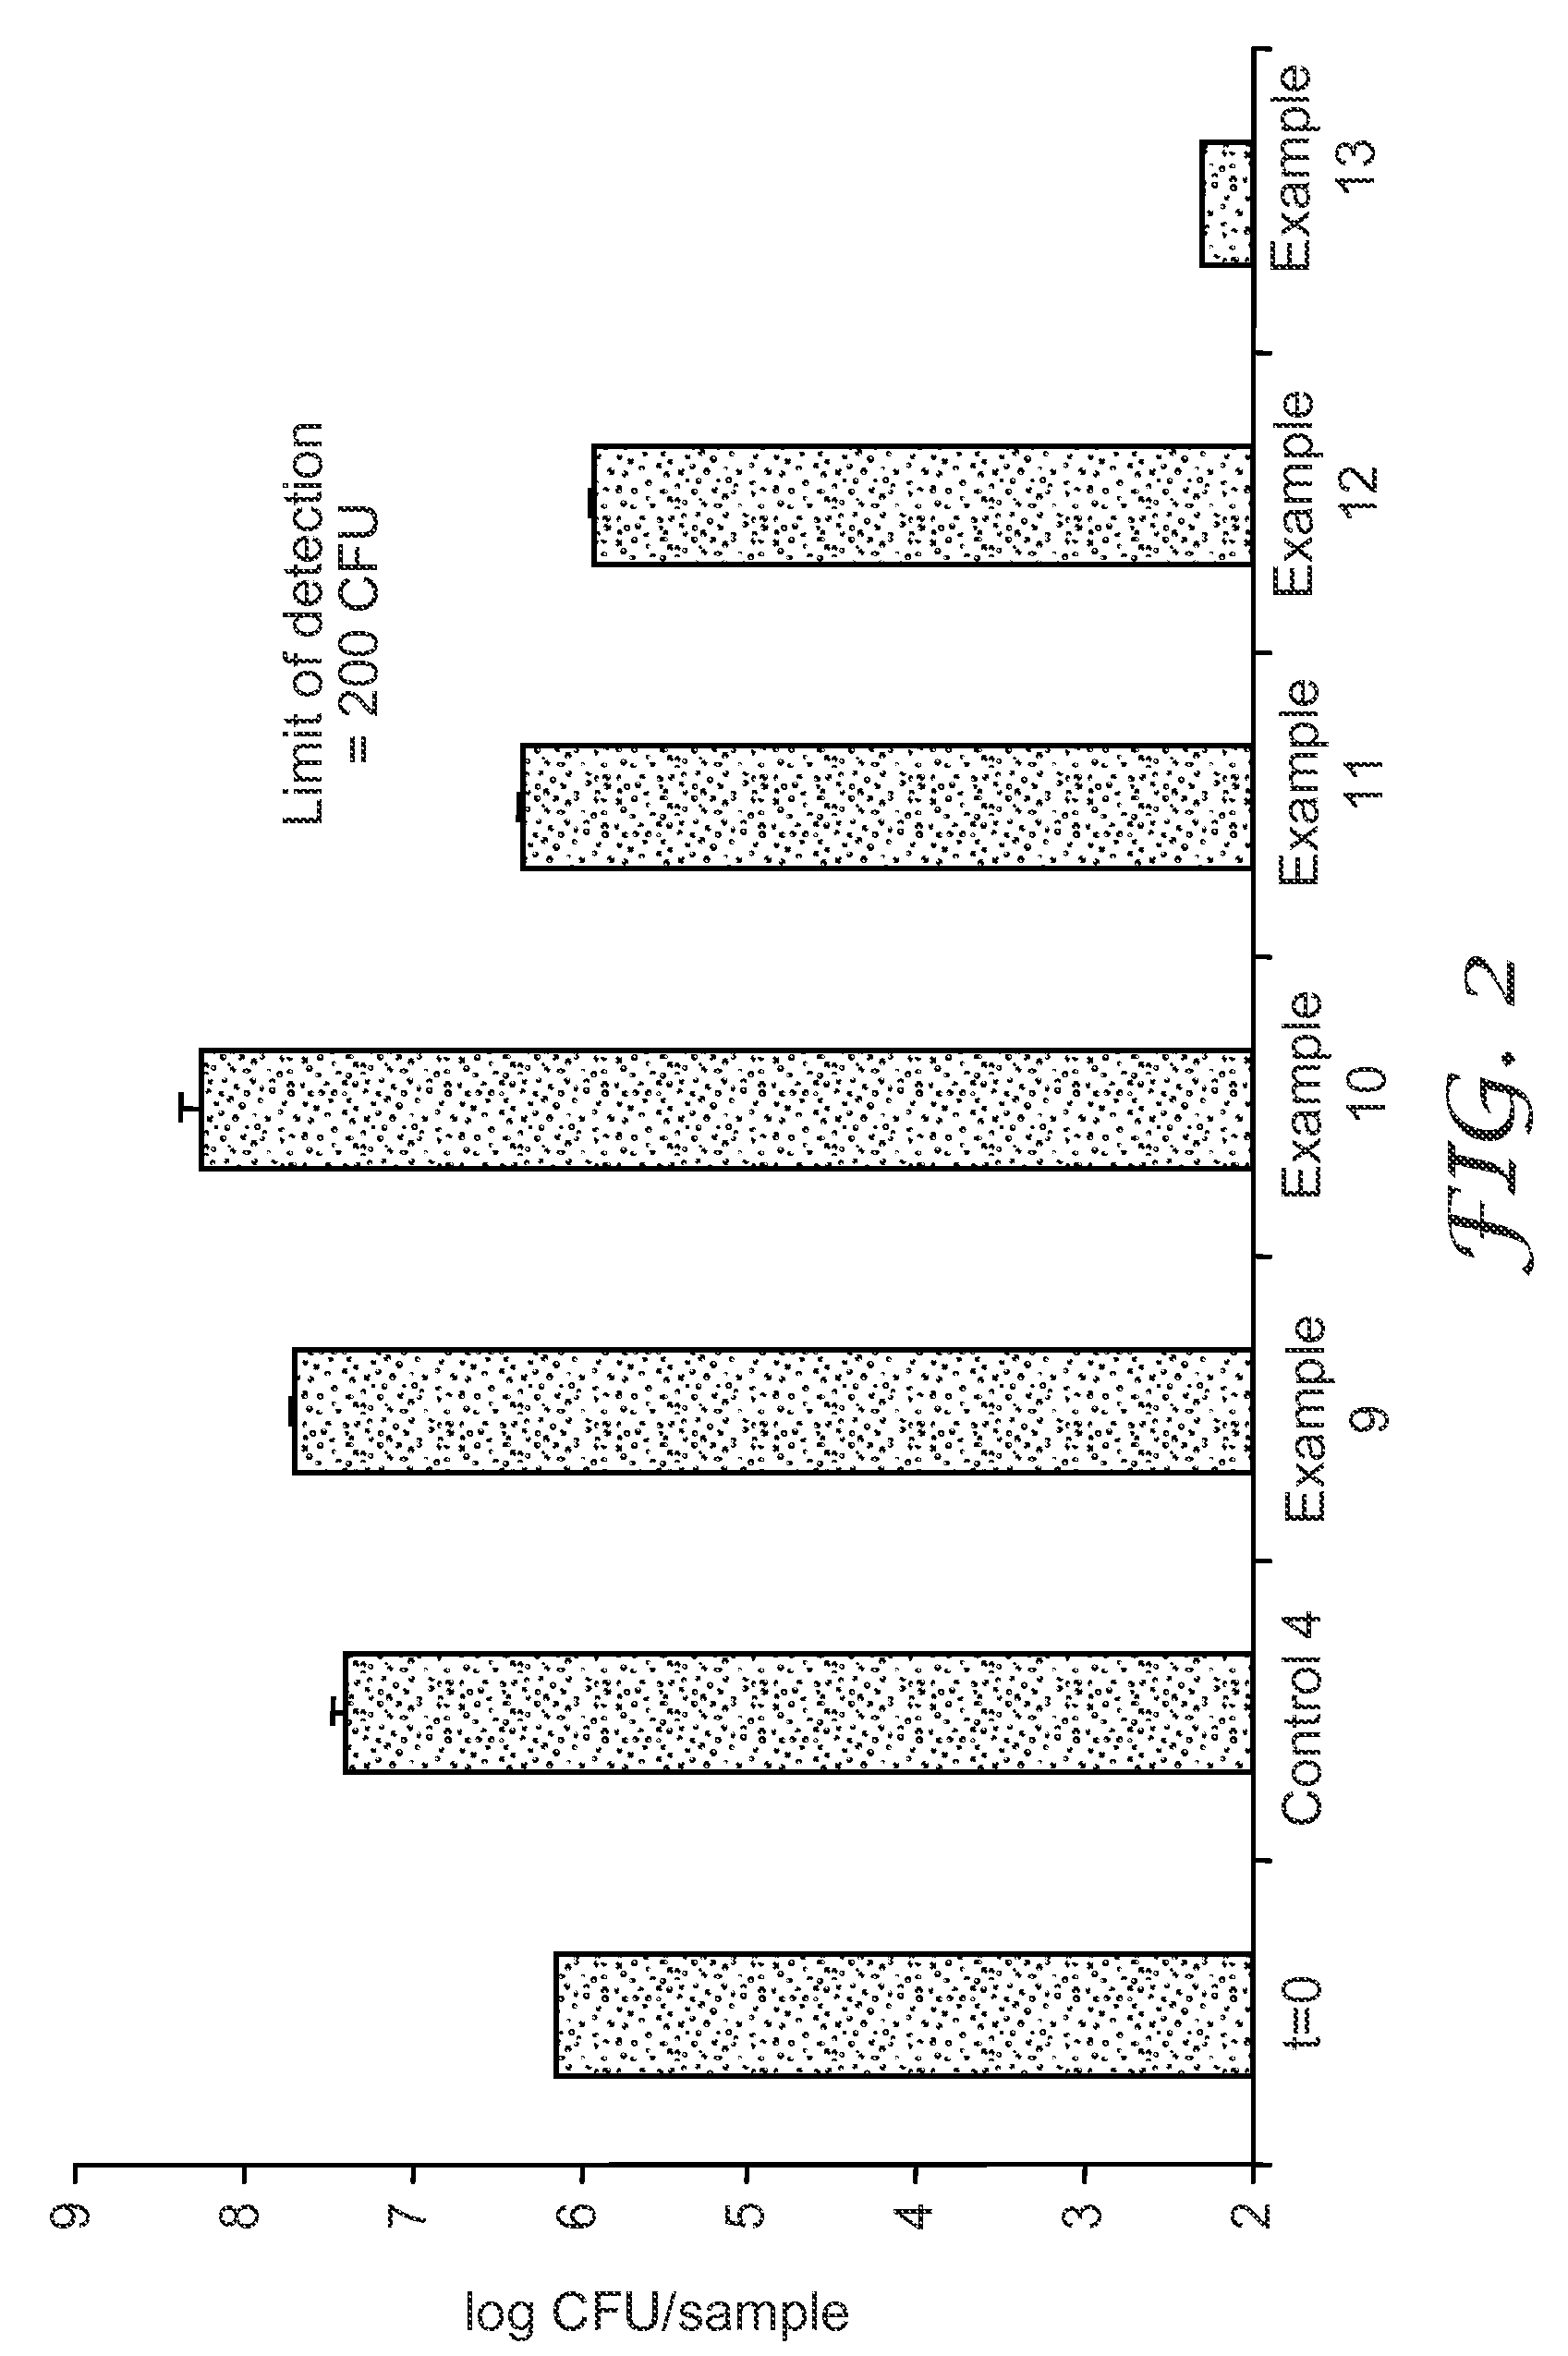 Antimicrobial disposable absorbent articles